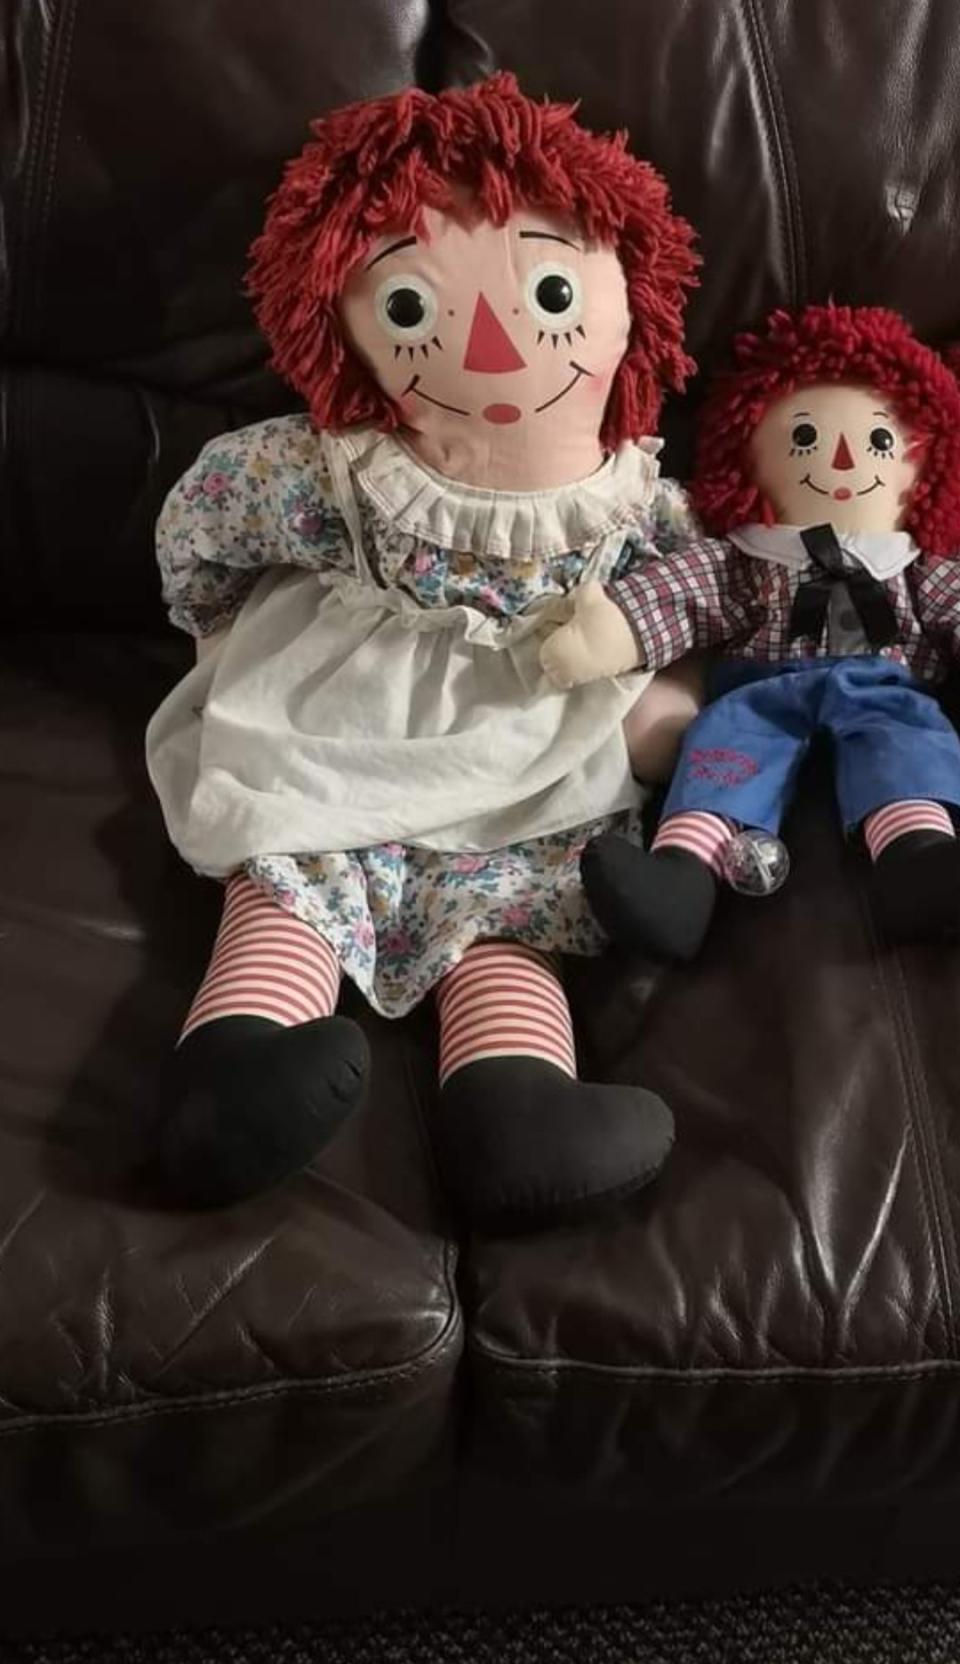 The doll is the same as the one which inspired the Annabelle films (Collect/PA Real Life)